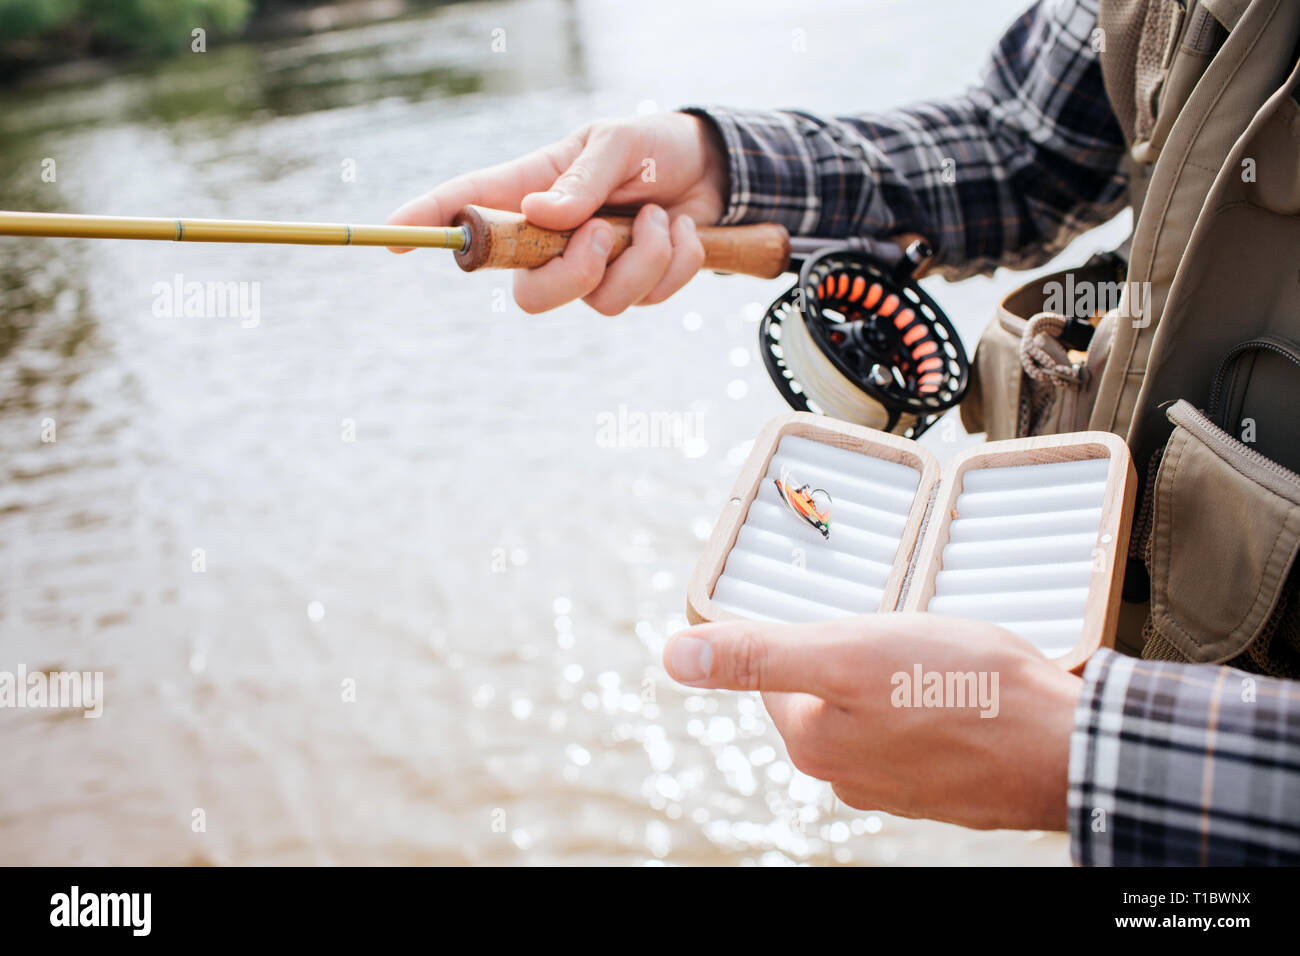 https://c8.alamy.com/comp/T1BWNX/cut-view-of-man-standing-in-water-and-holding-spinning-with-reel-in-one-hand-and-a-box-with-one-artificial-silicone-fishing-lure-with-the-other-one-T1BWNX.jpg